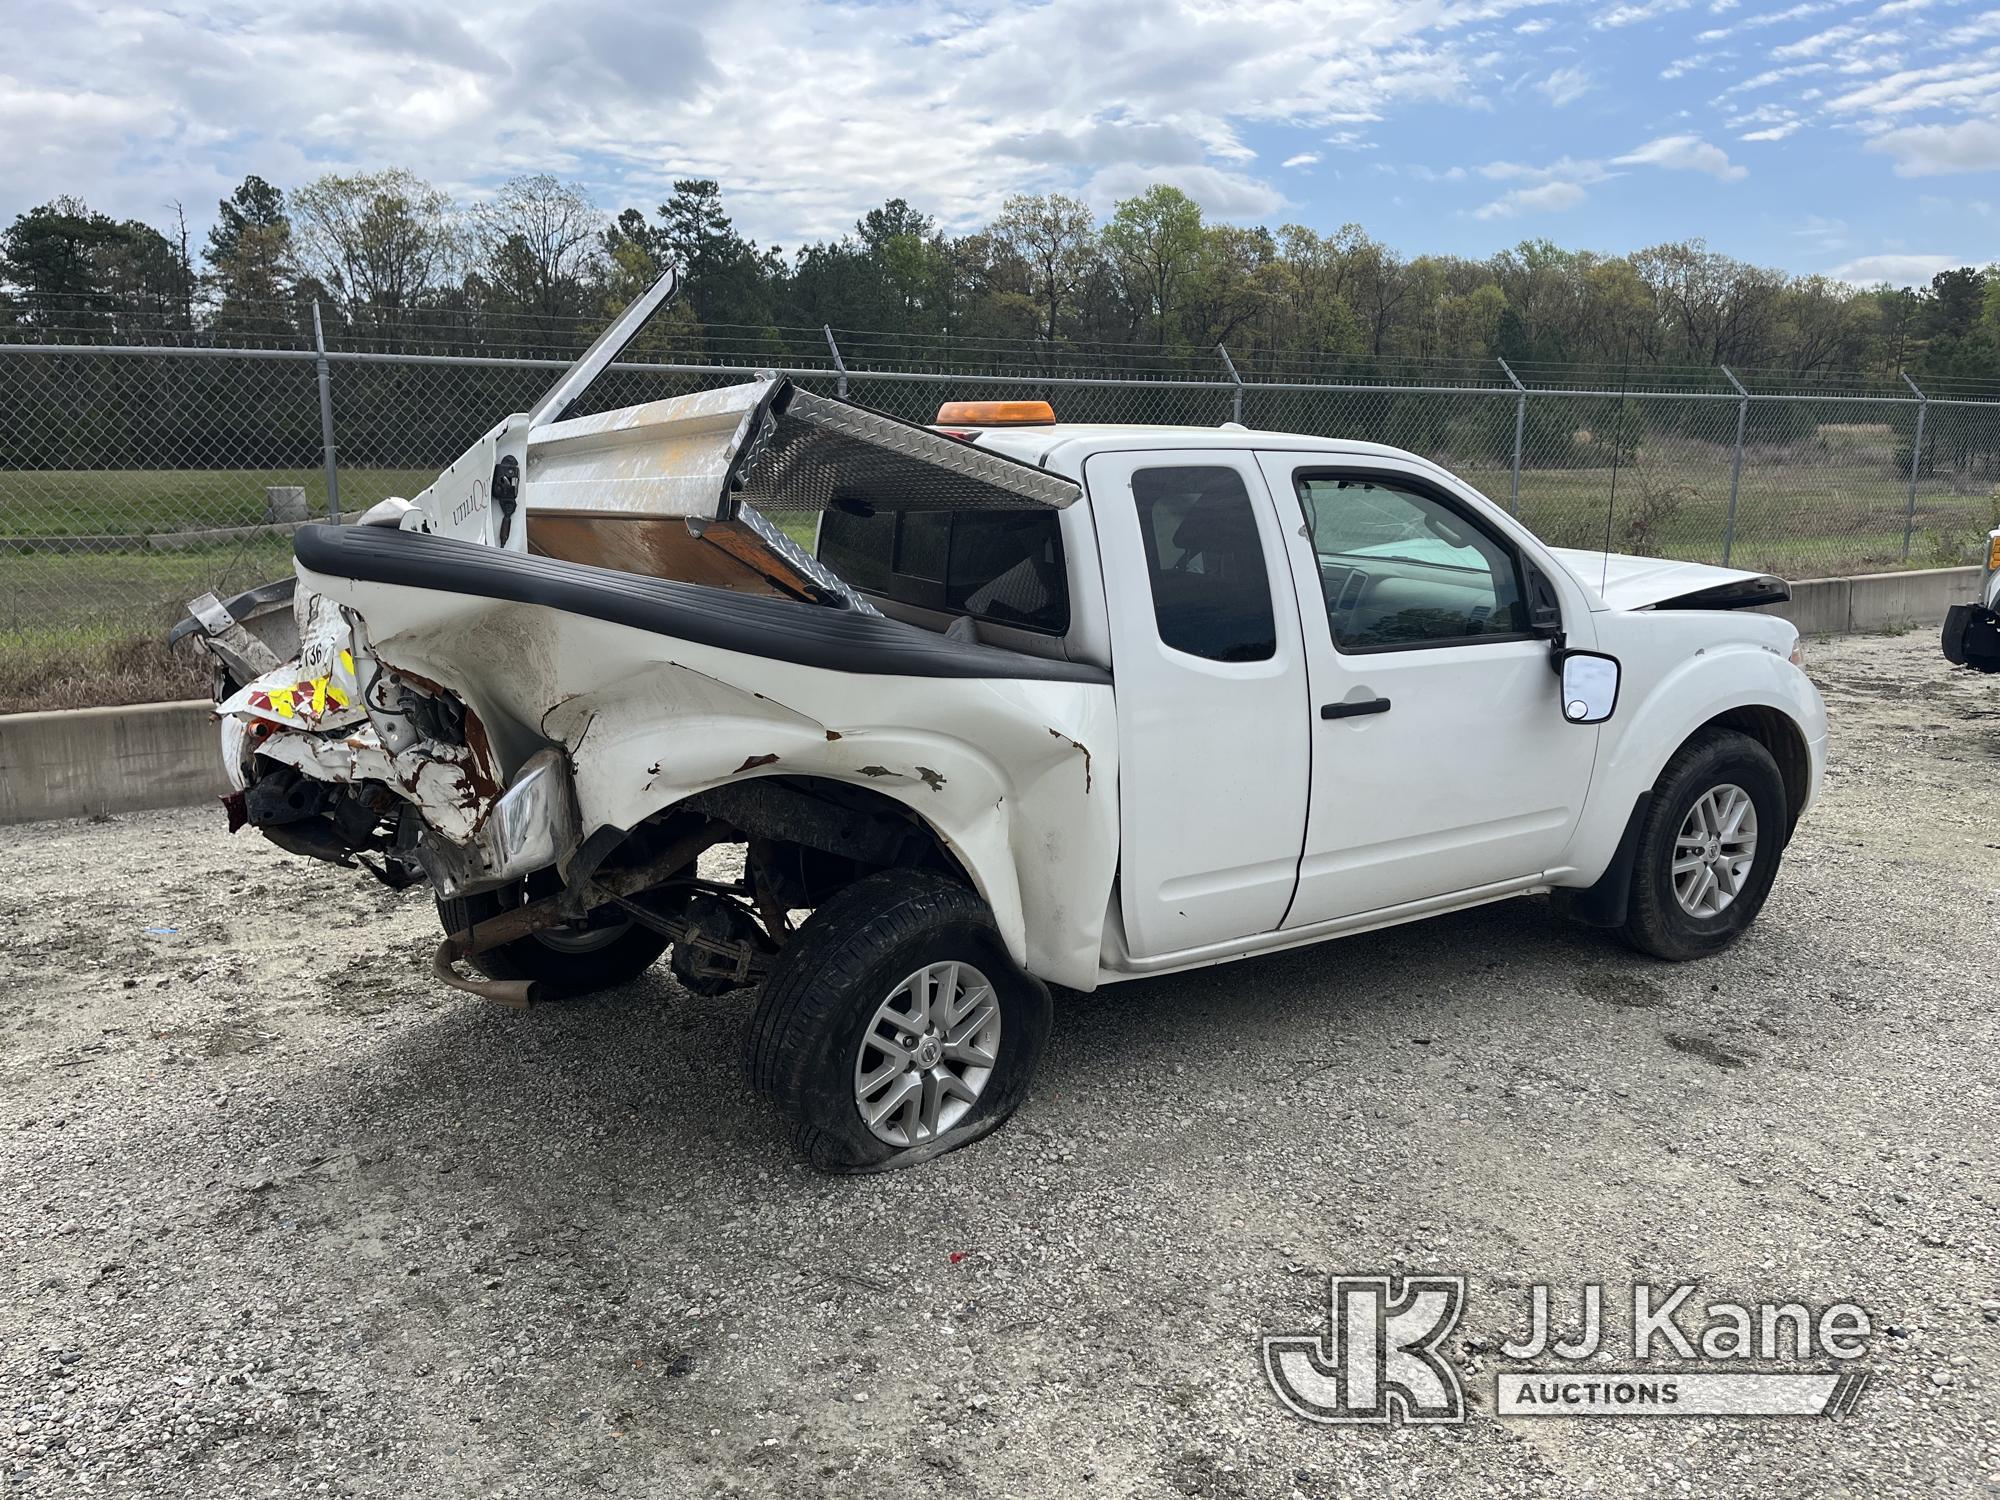 (Chester, VA) 2017 Nissan Frontier 4x4 Extended-Cab Pickup Truck Wrecked, Parts Only) (Operating Con